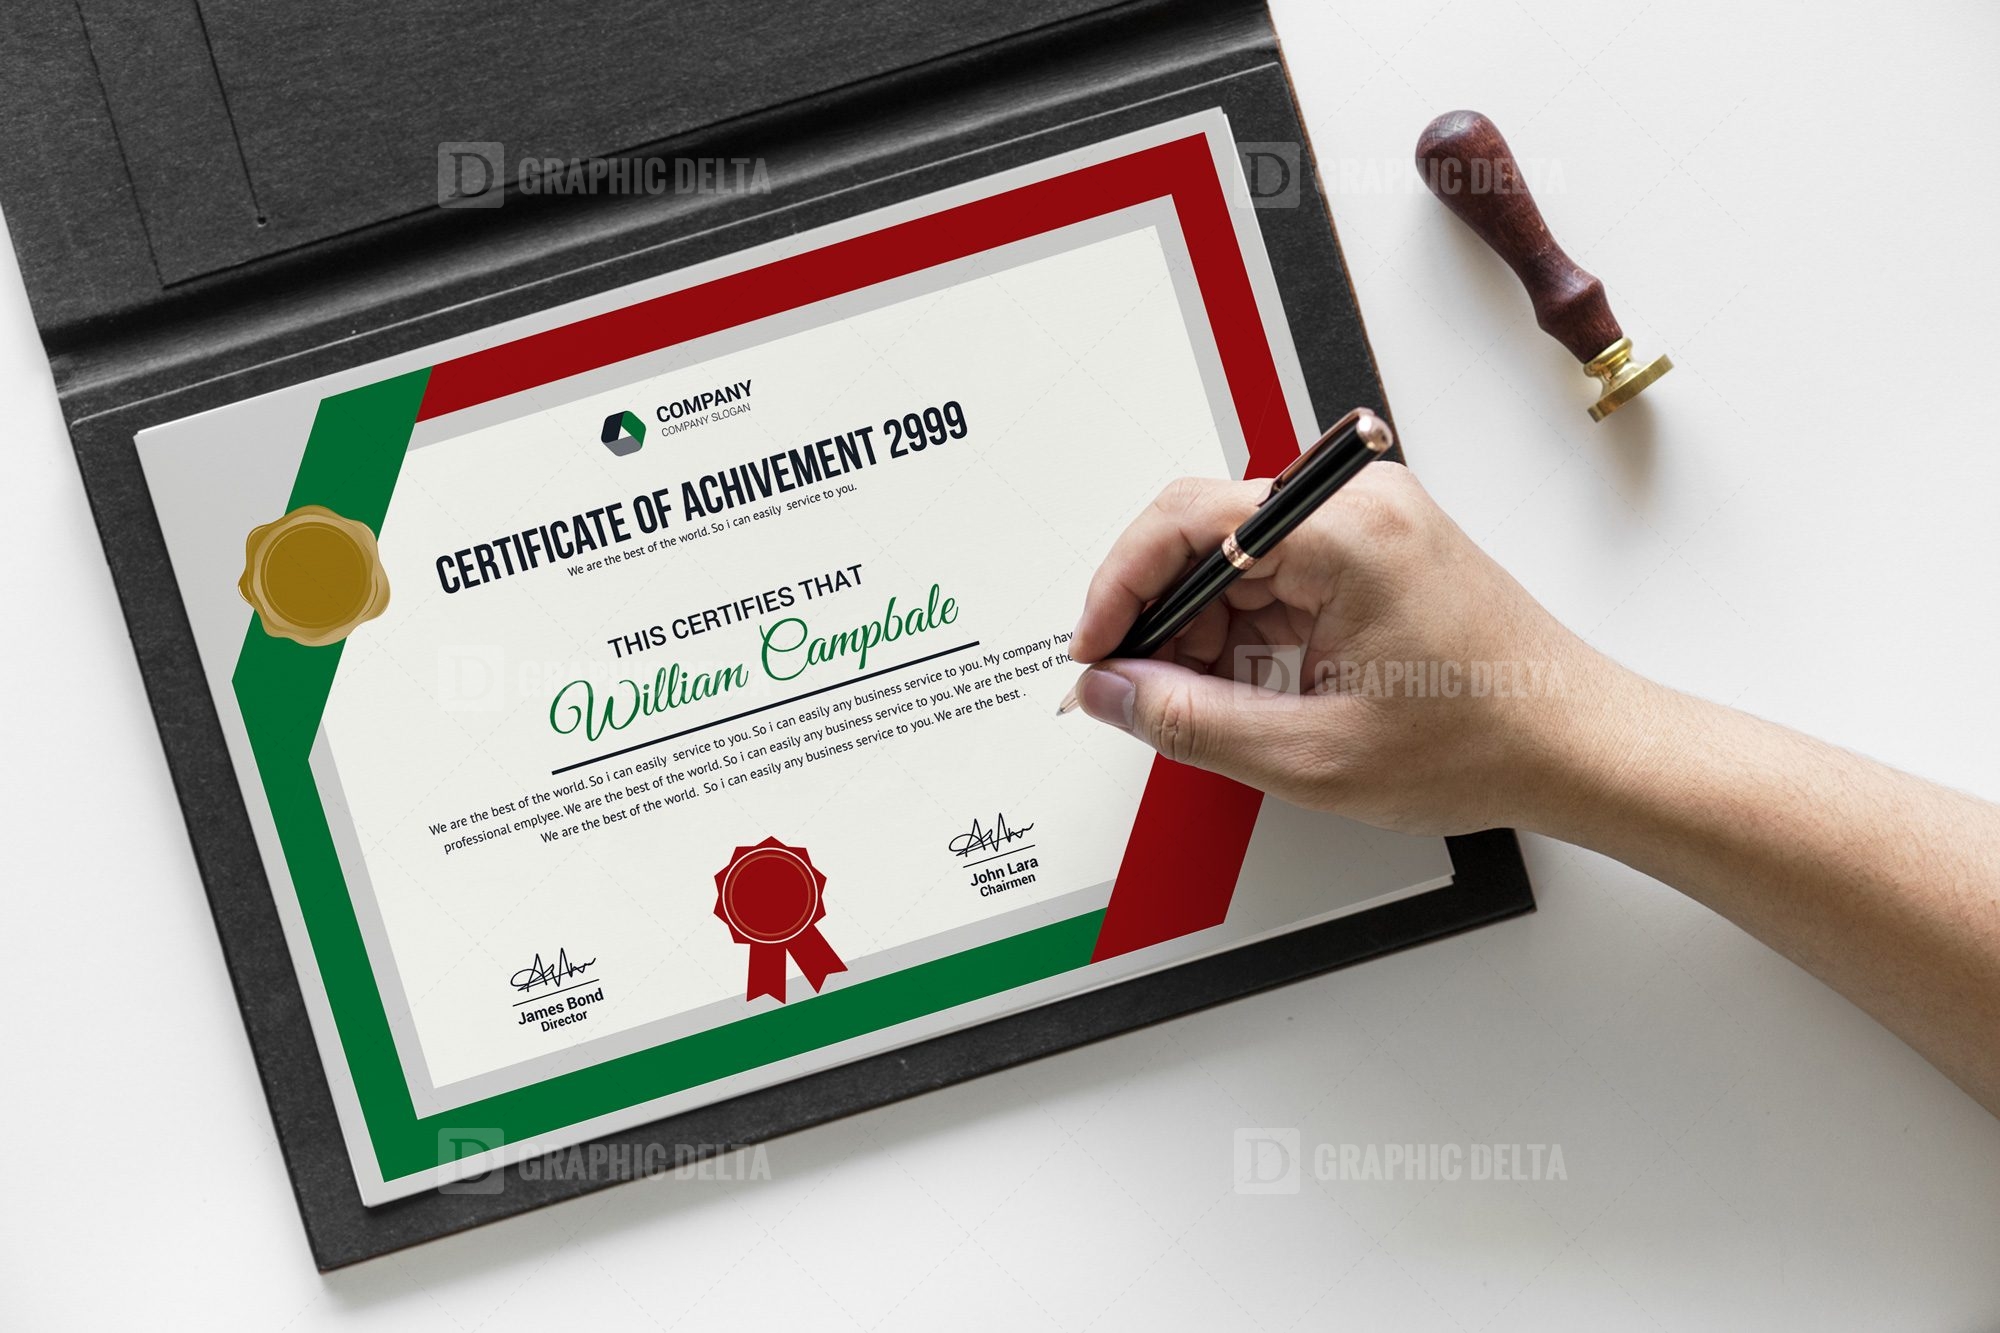 New Quality Certificate Template - Graphic Delta  Graphic Intended For Corporate Bond Certificate Template